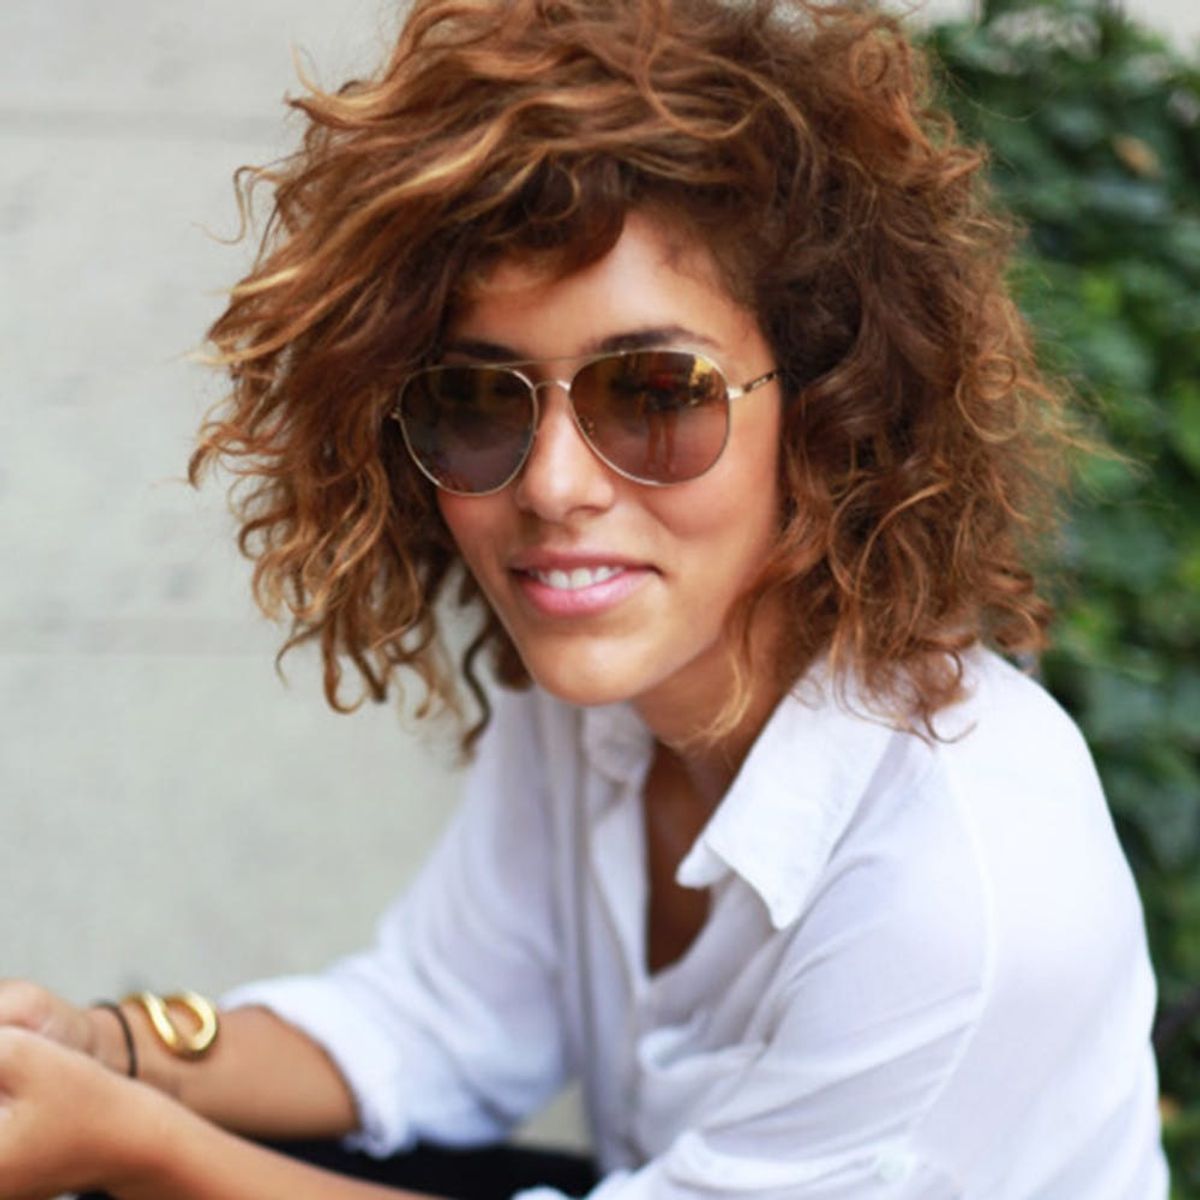 This Is Your Ultimate Short Hair Style Guide